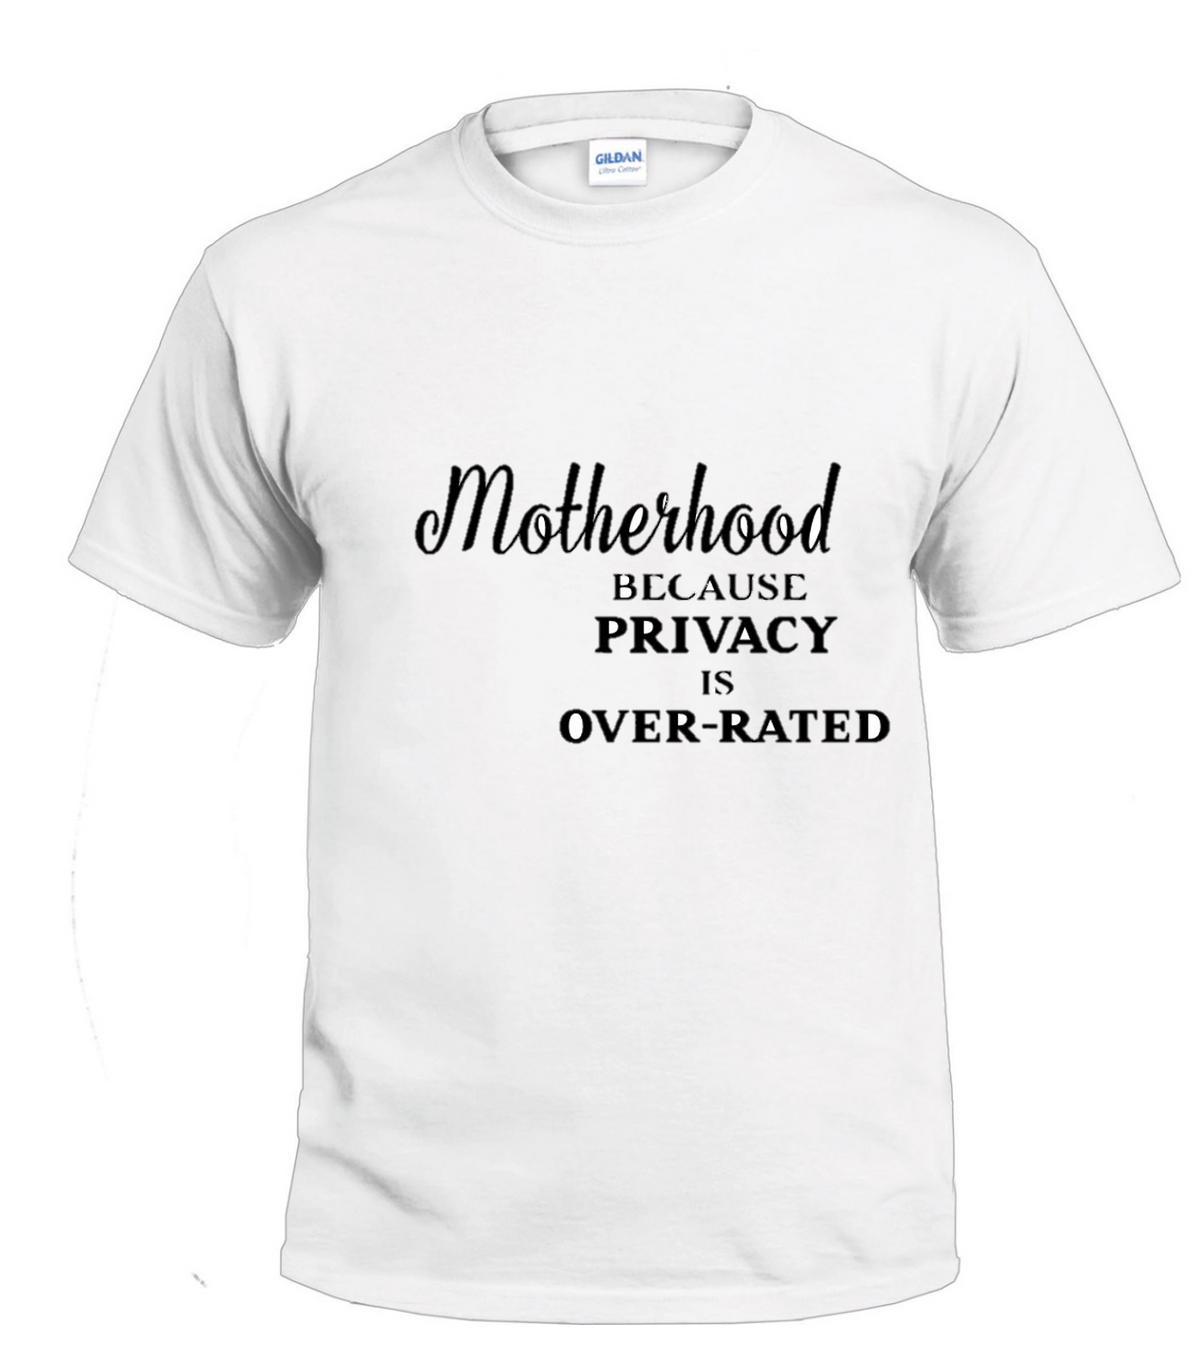 Motherhood Because Privacy is Overrated t-shirt